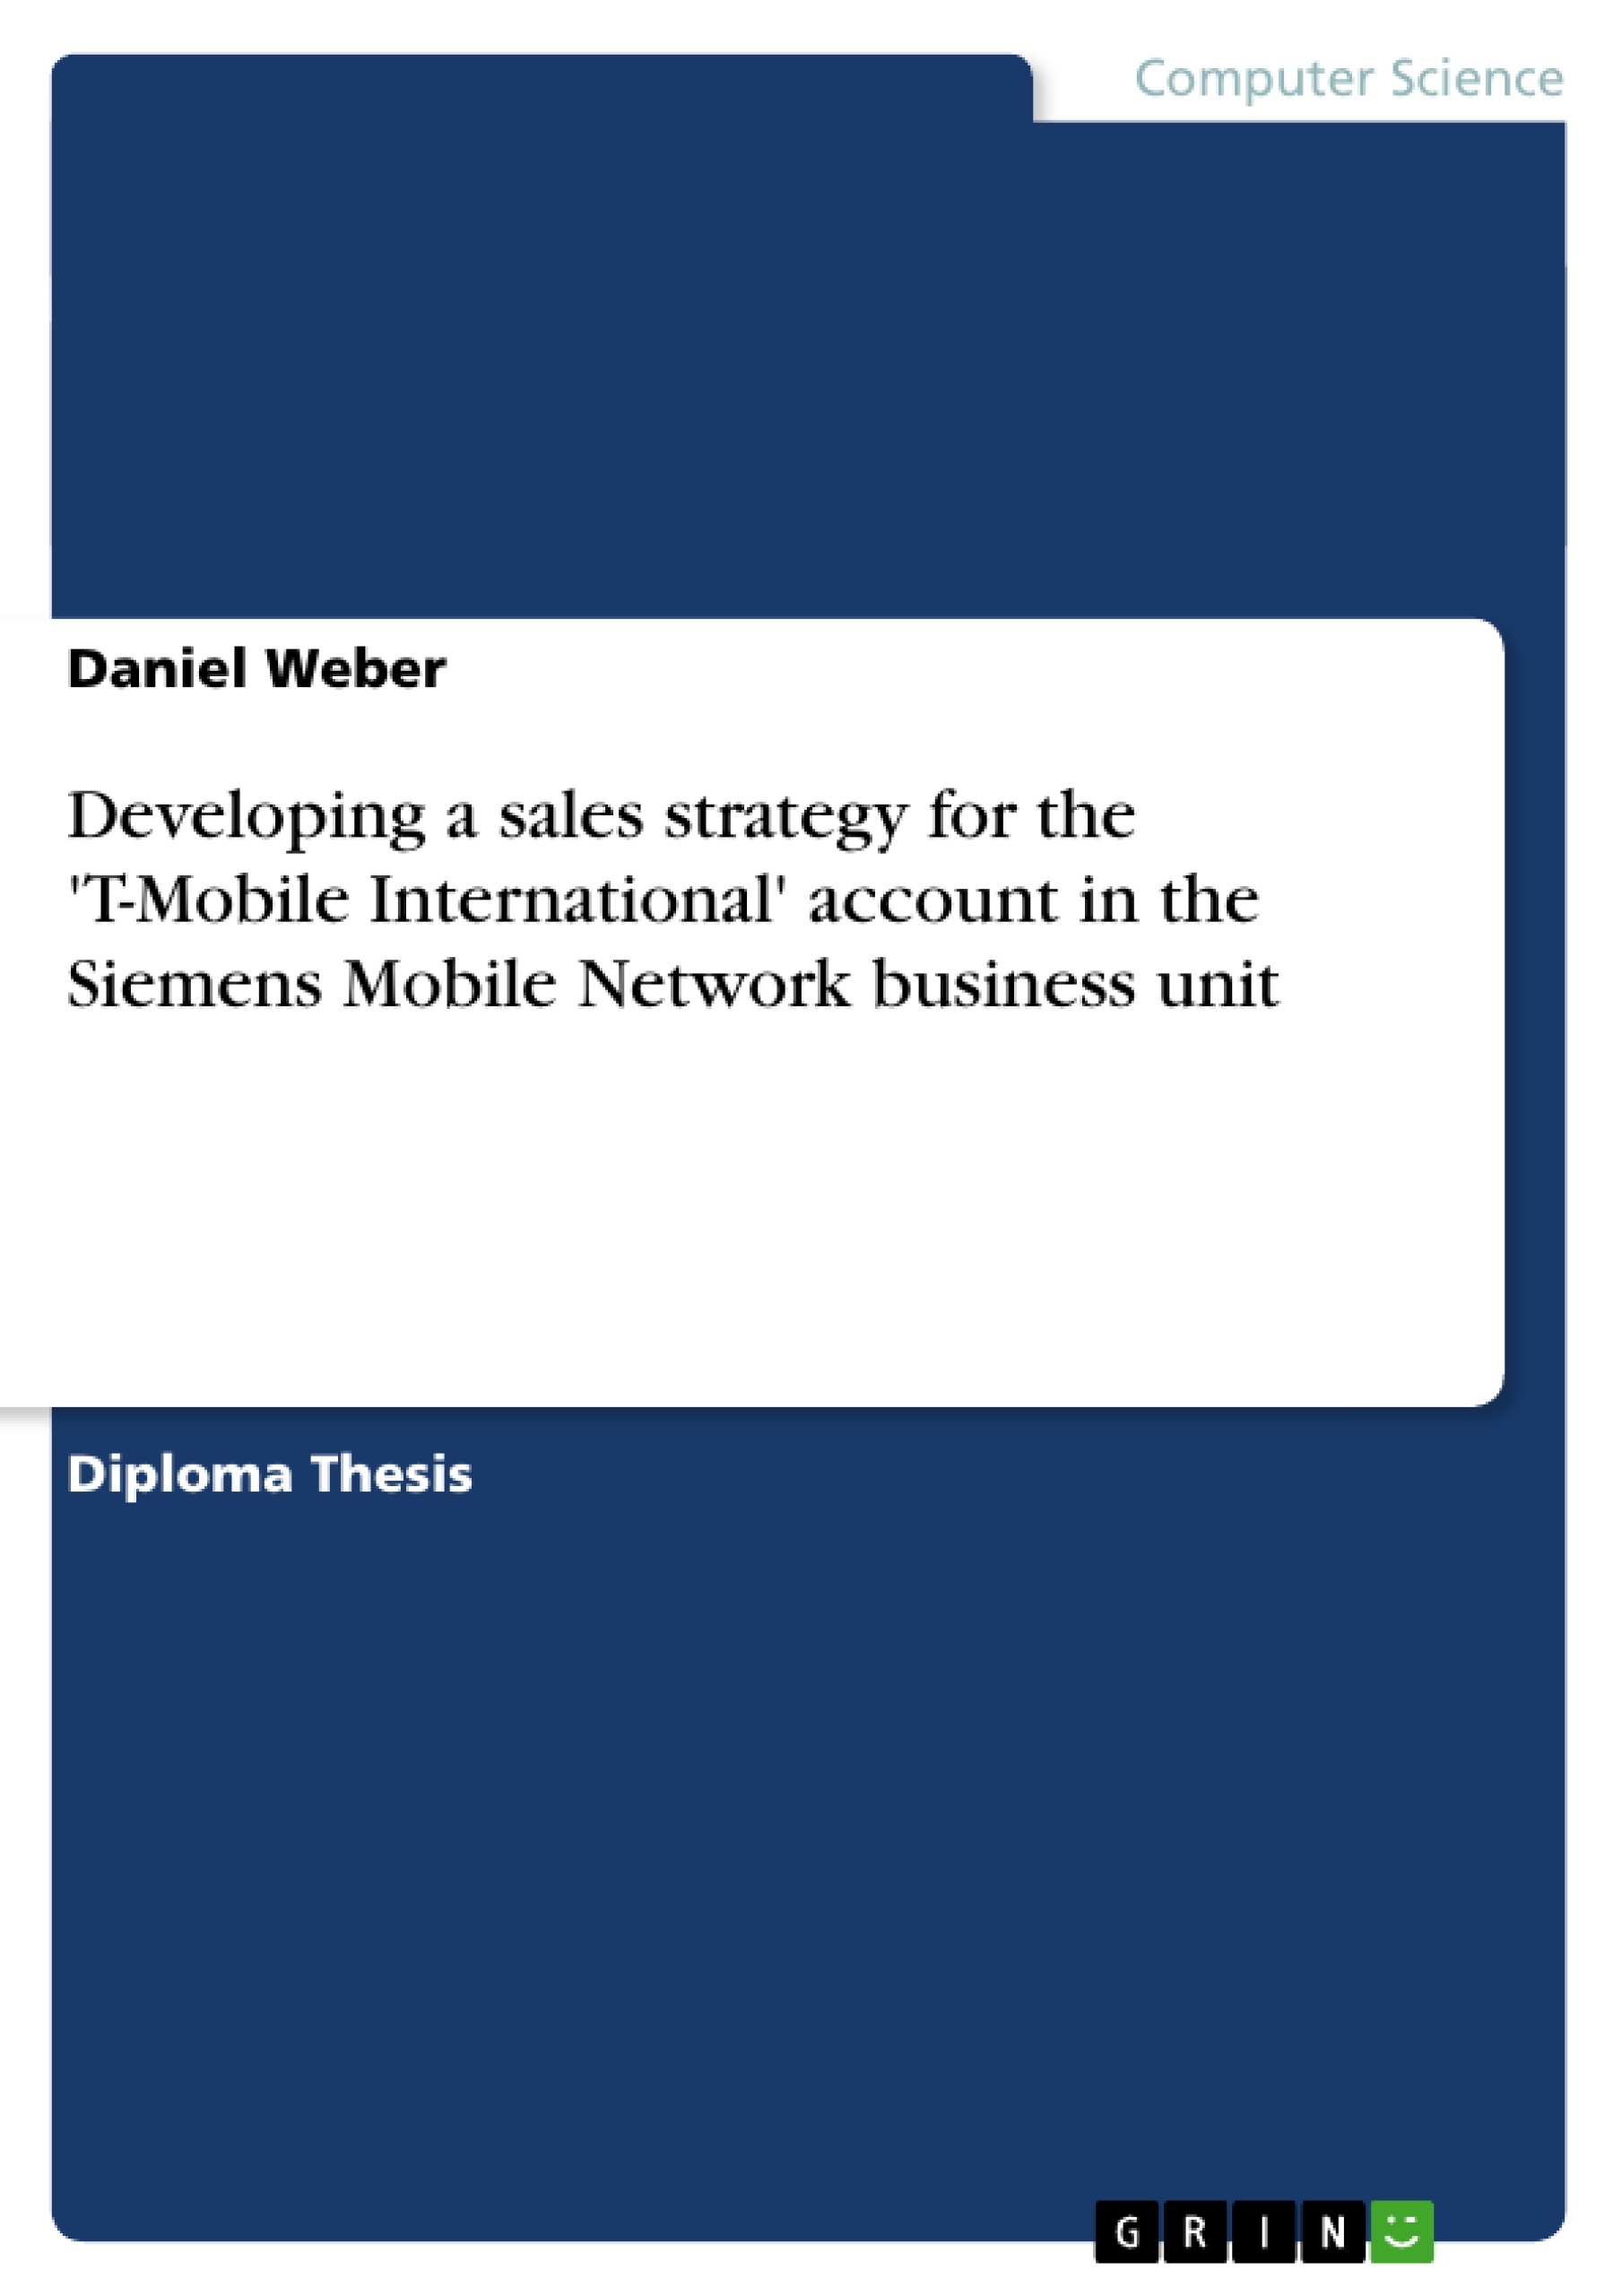 Title: Developing a sales strategy for the 'T-Mobile International' account in the Siemens Mobile Network business unit